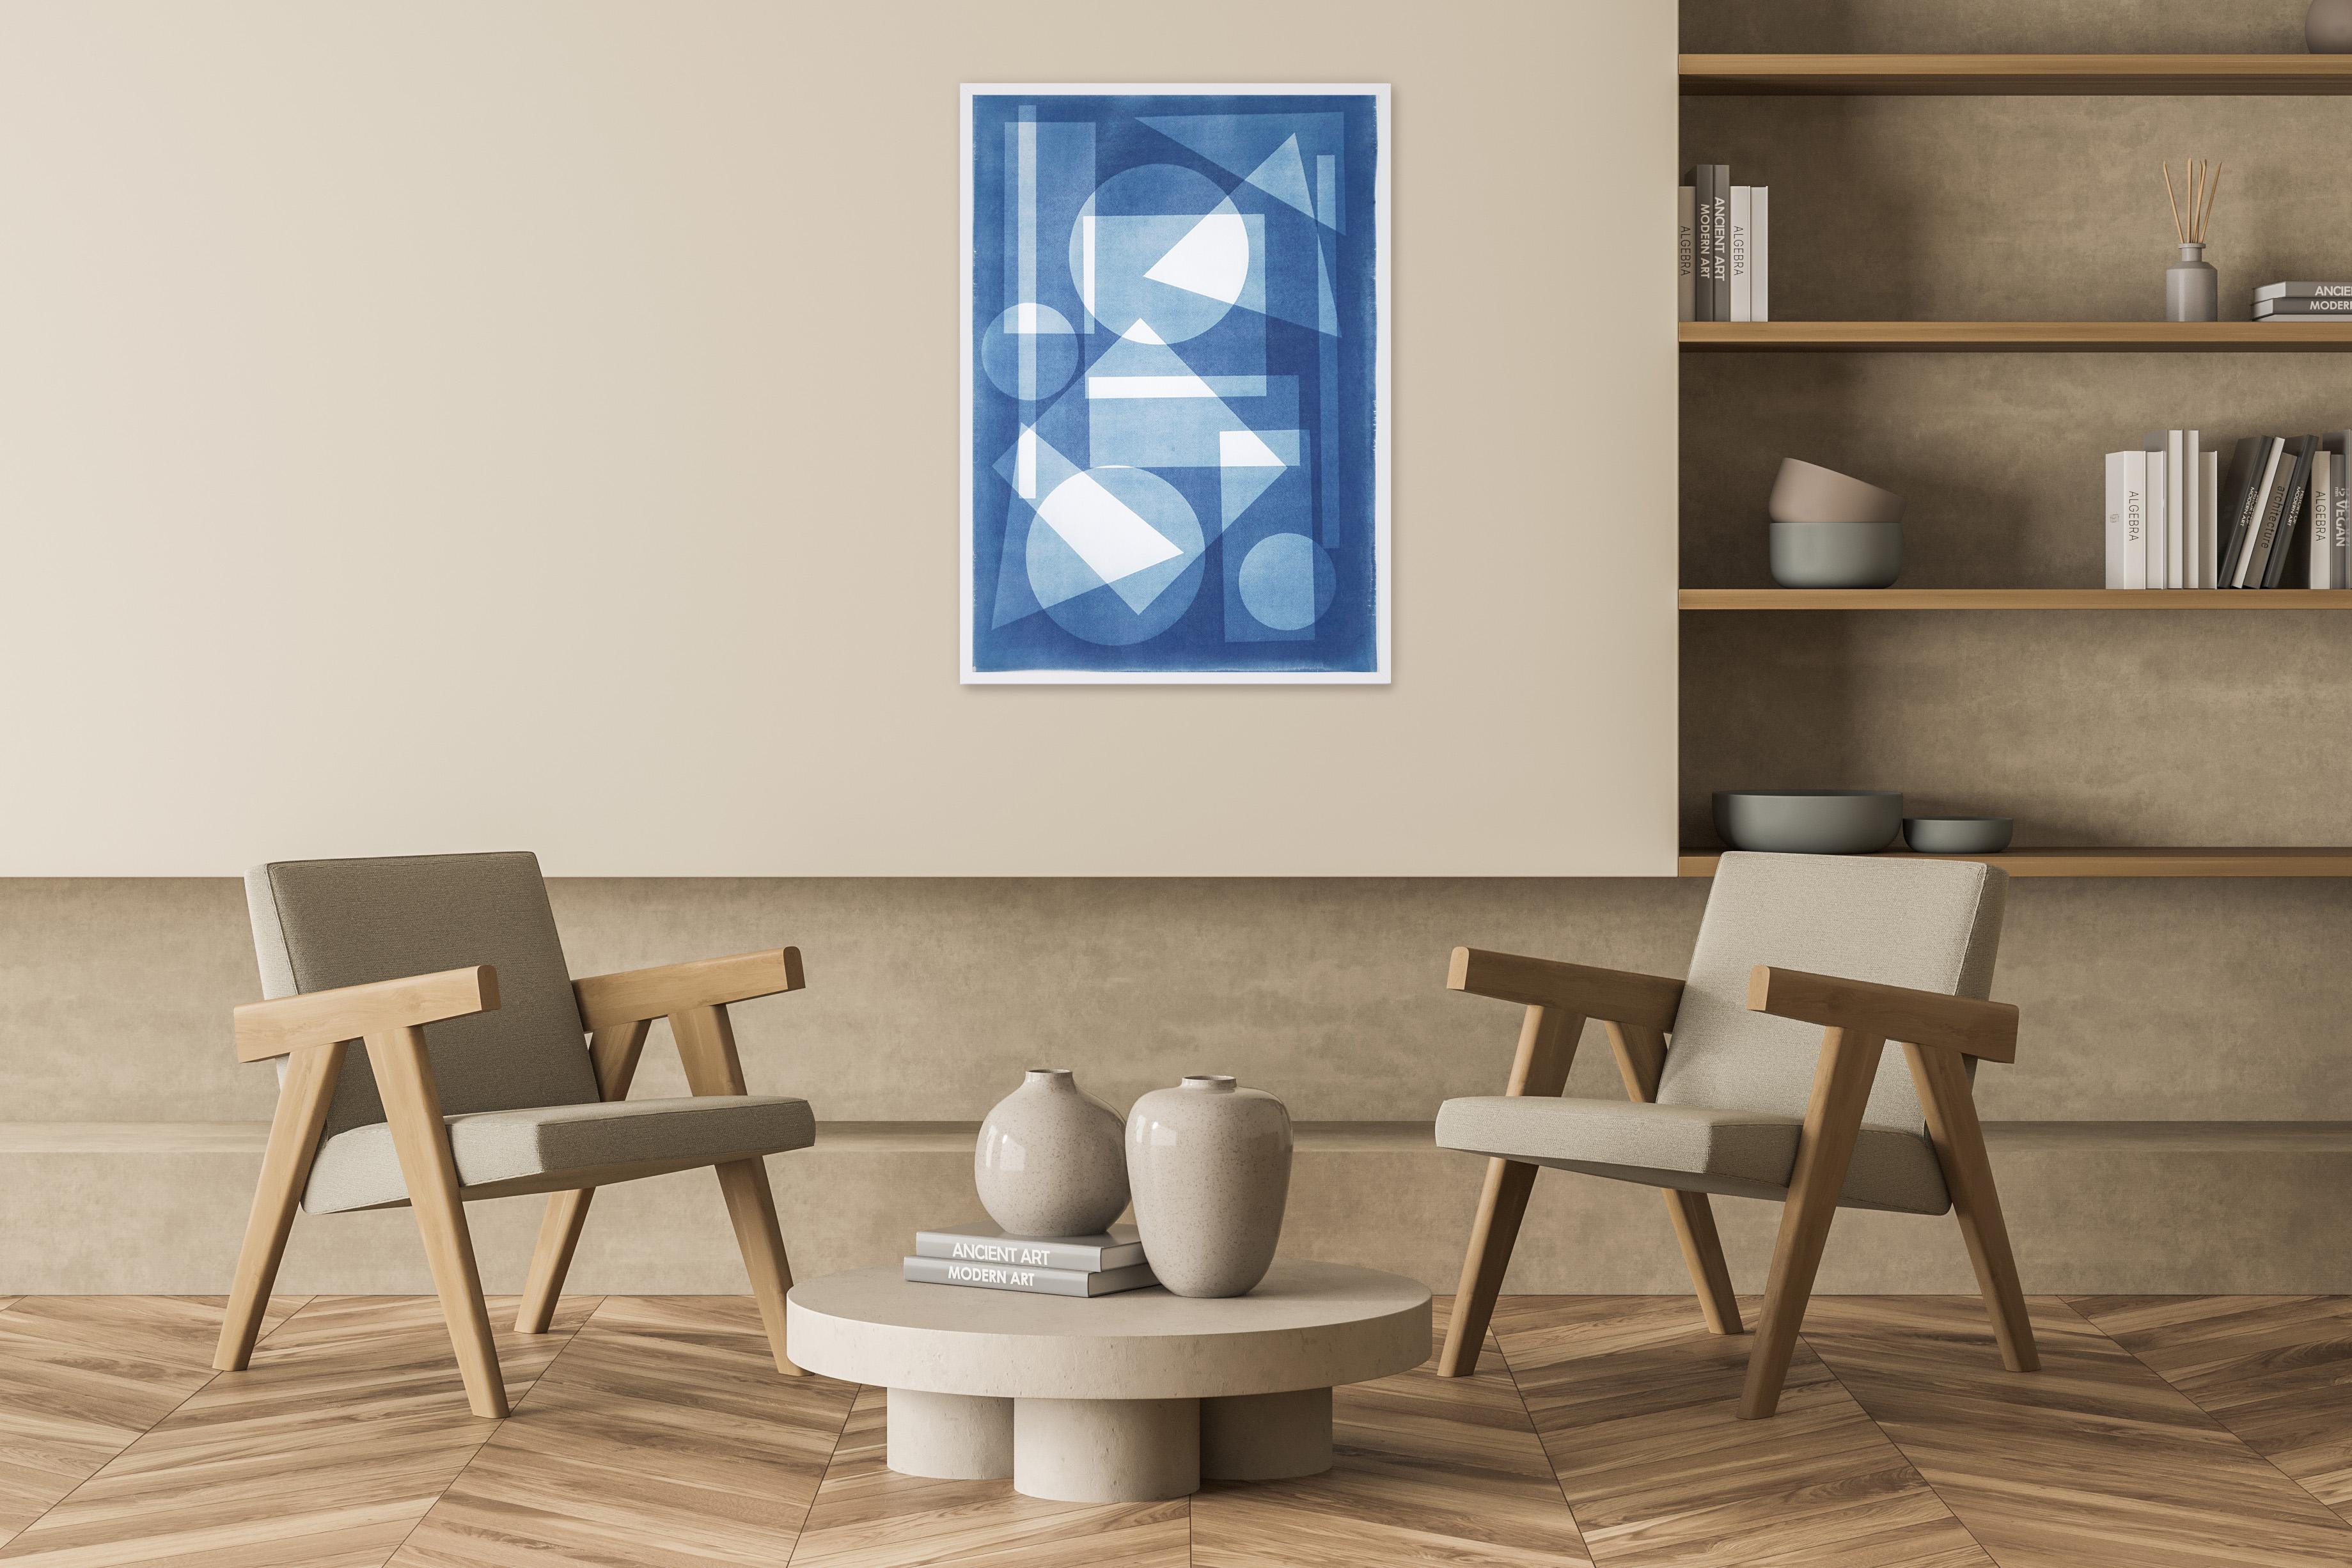 Constructivist Castle in Blue Tones, Primary Shapes Handmade Cyanotype Monotype - Photograph by Kind of Cyan